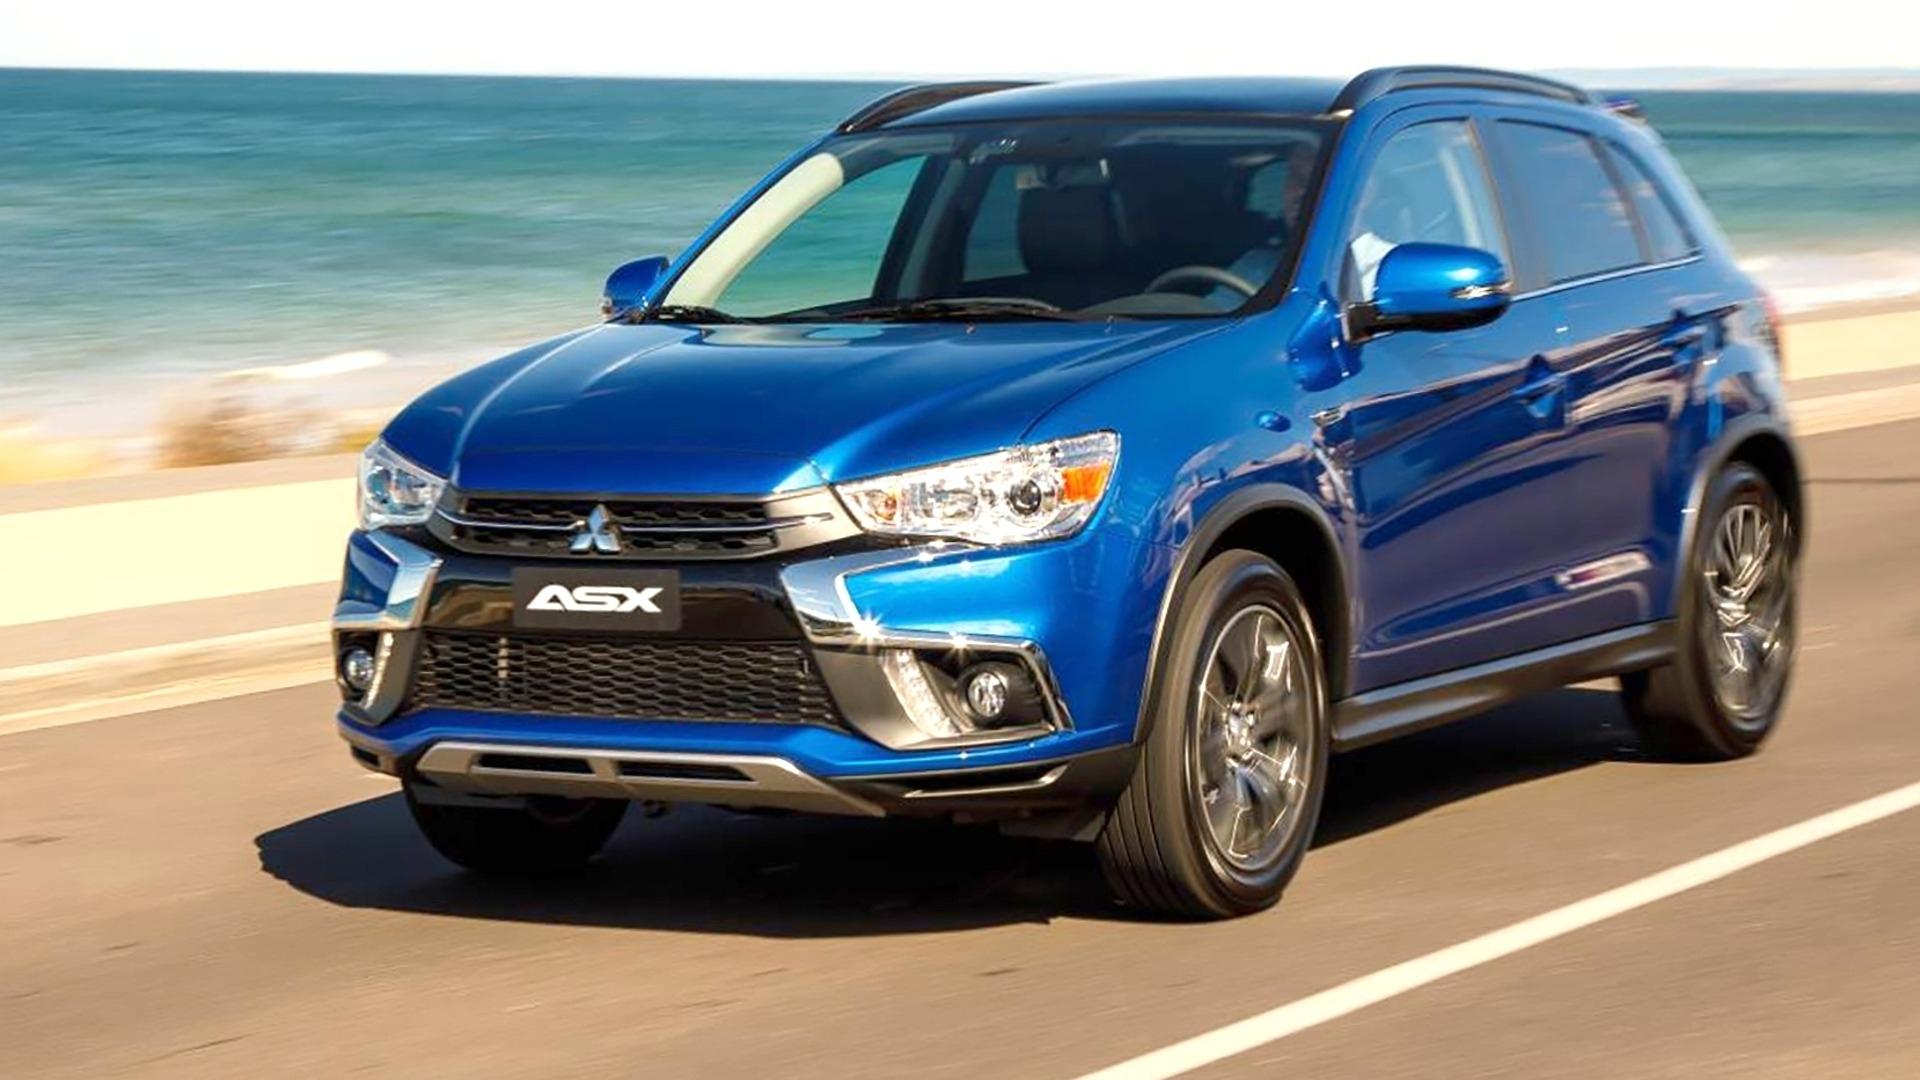 Mitsubishi Asx 2019 Picture, Release date, and Review. Car Release 2019